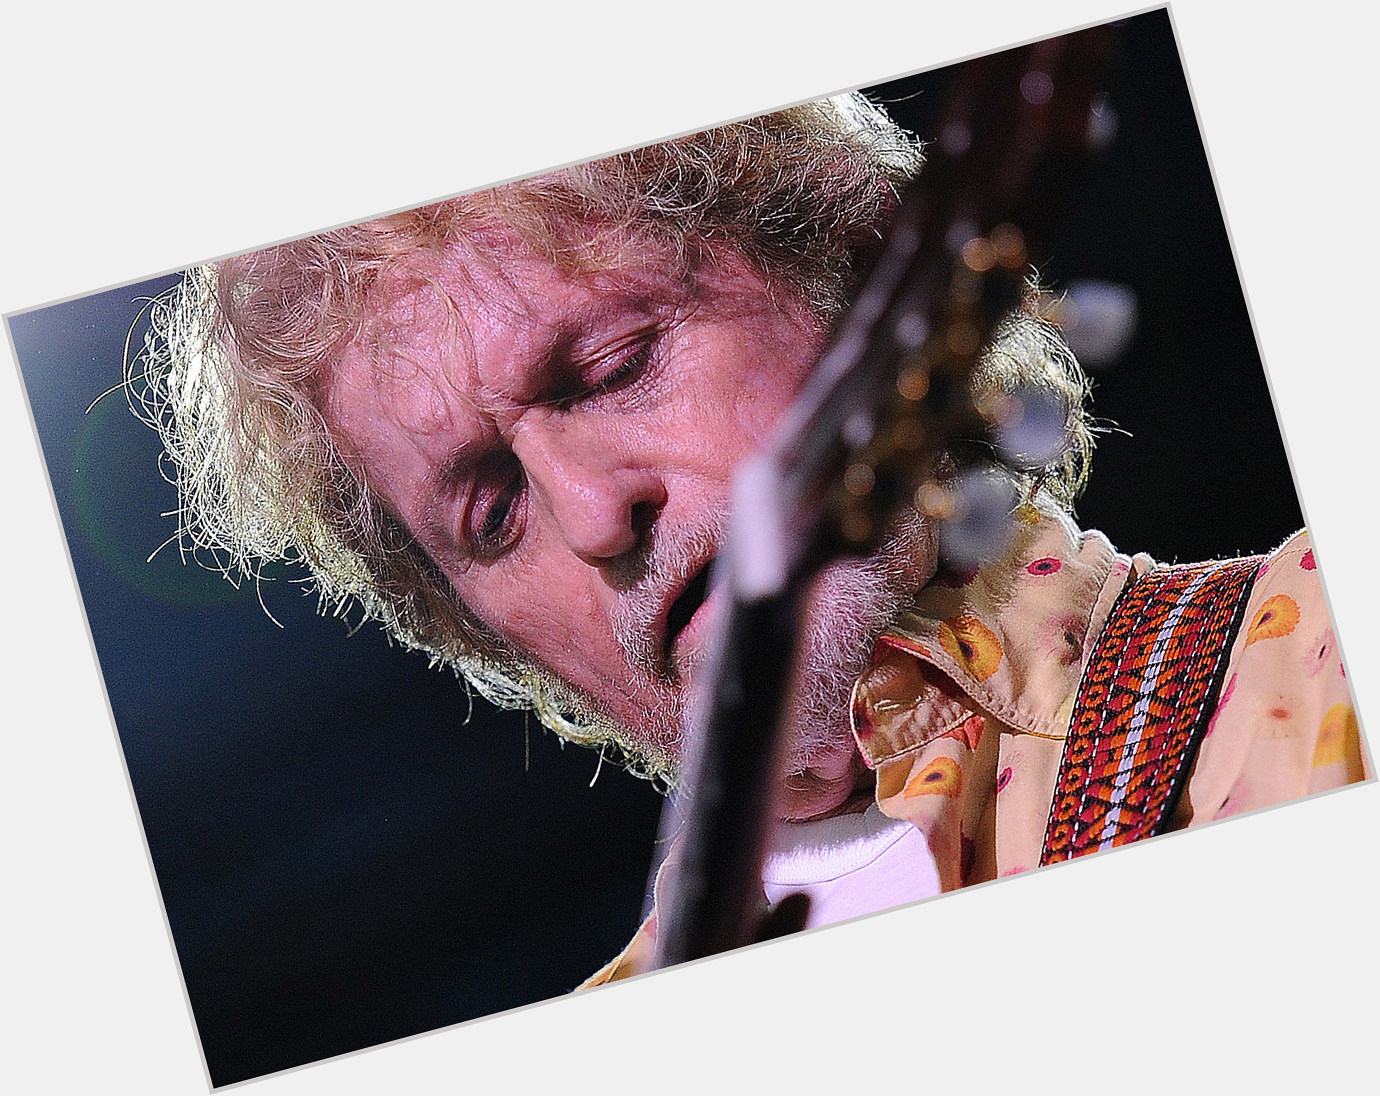 <a href="/hot-men/jon-anderson/is-he-touring-yes-married">Jon Anderson</a> Average body,  